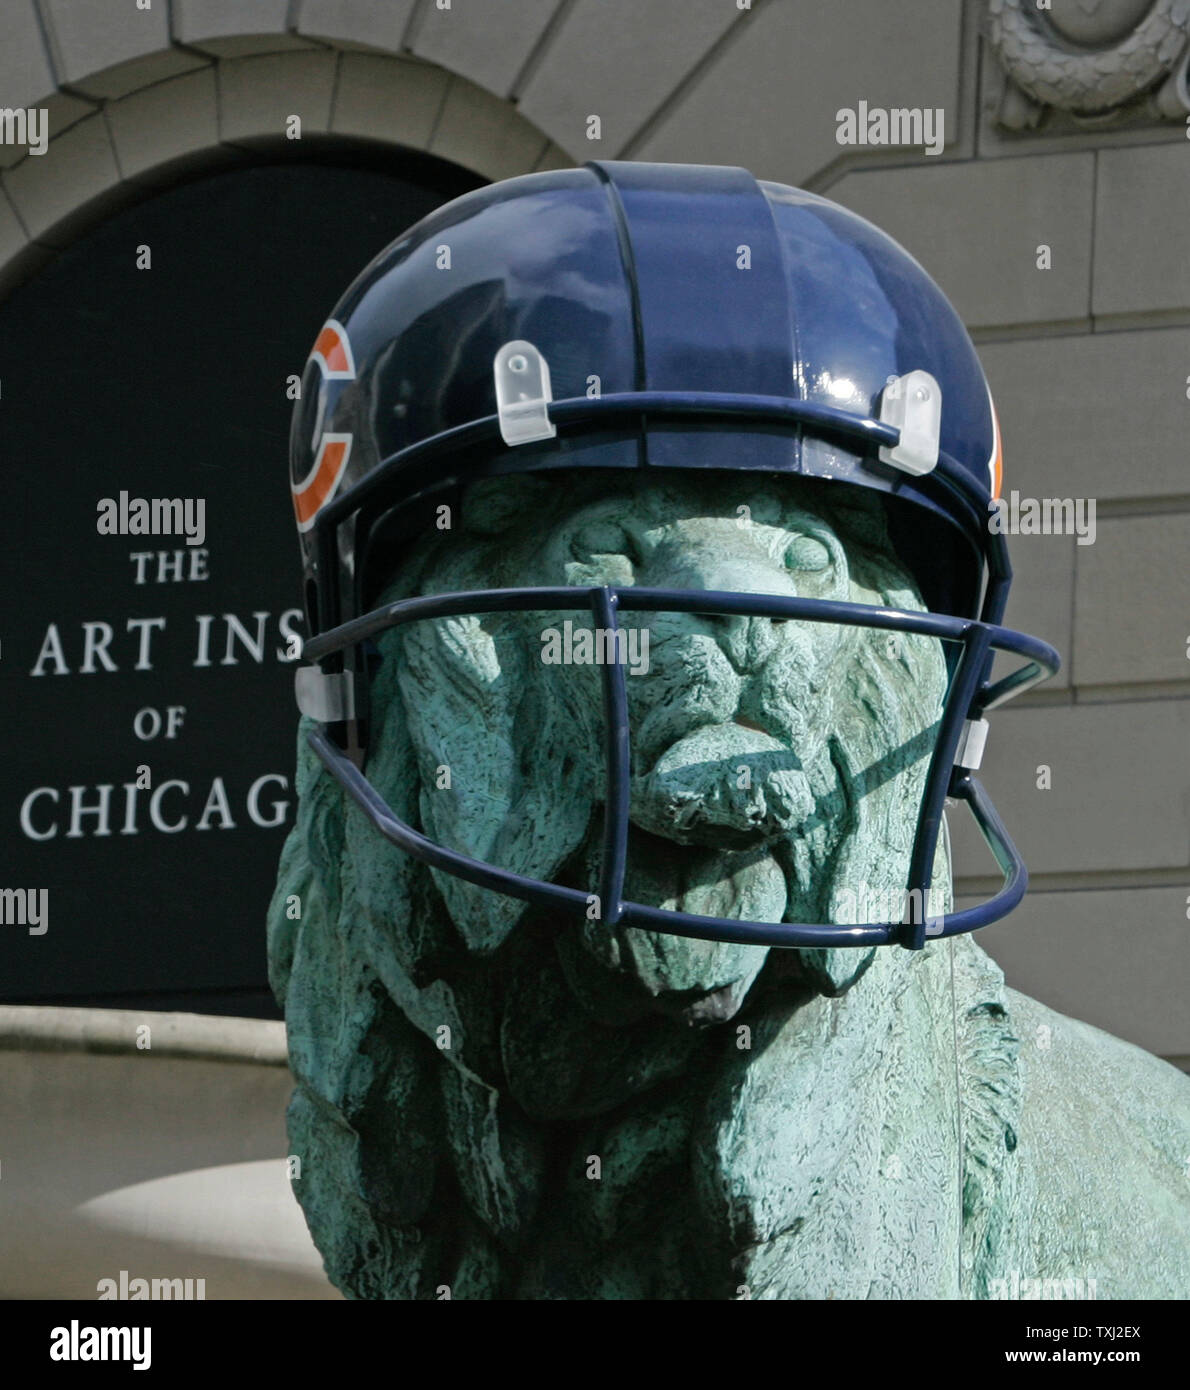 One of the two bronze lions wears a fiberglass Chicago Bears helmet at The Art Institute of Chicago on February 2, 2007, in Chicago. The lions were fitted with fiberglass helmets to celebrate the Bears winning season. The Bears play the Indianapolis Colts in Super Bowl XLI on Sunday. (UPI Photo/Brian Kersey) Stock Photo